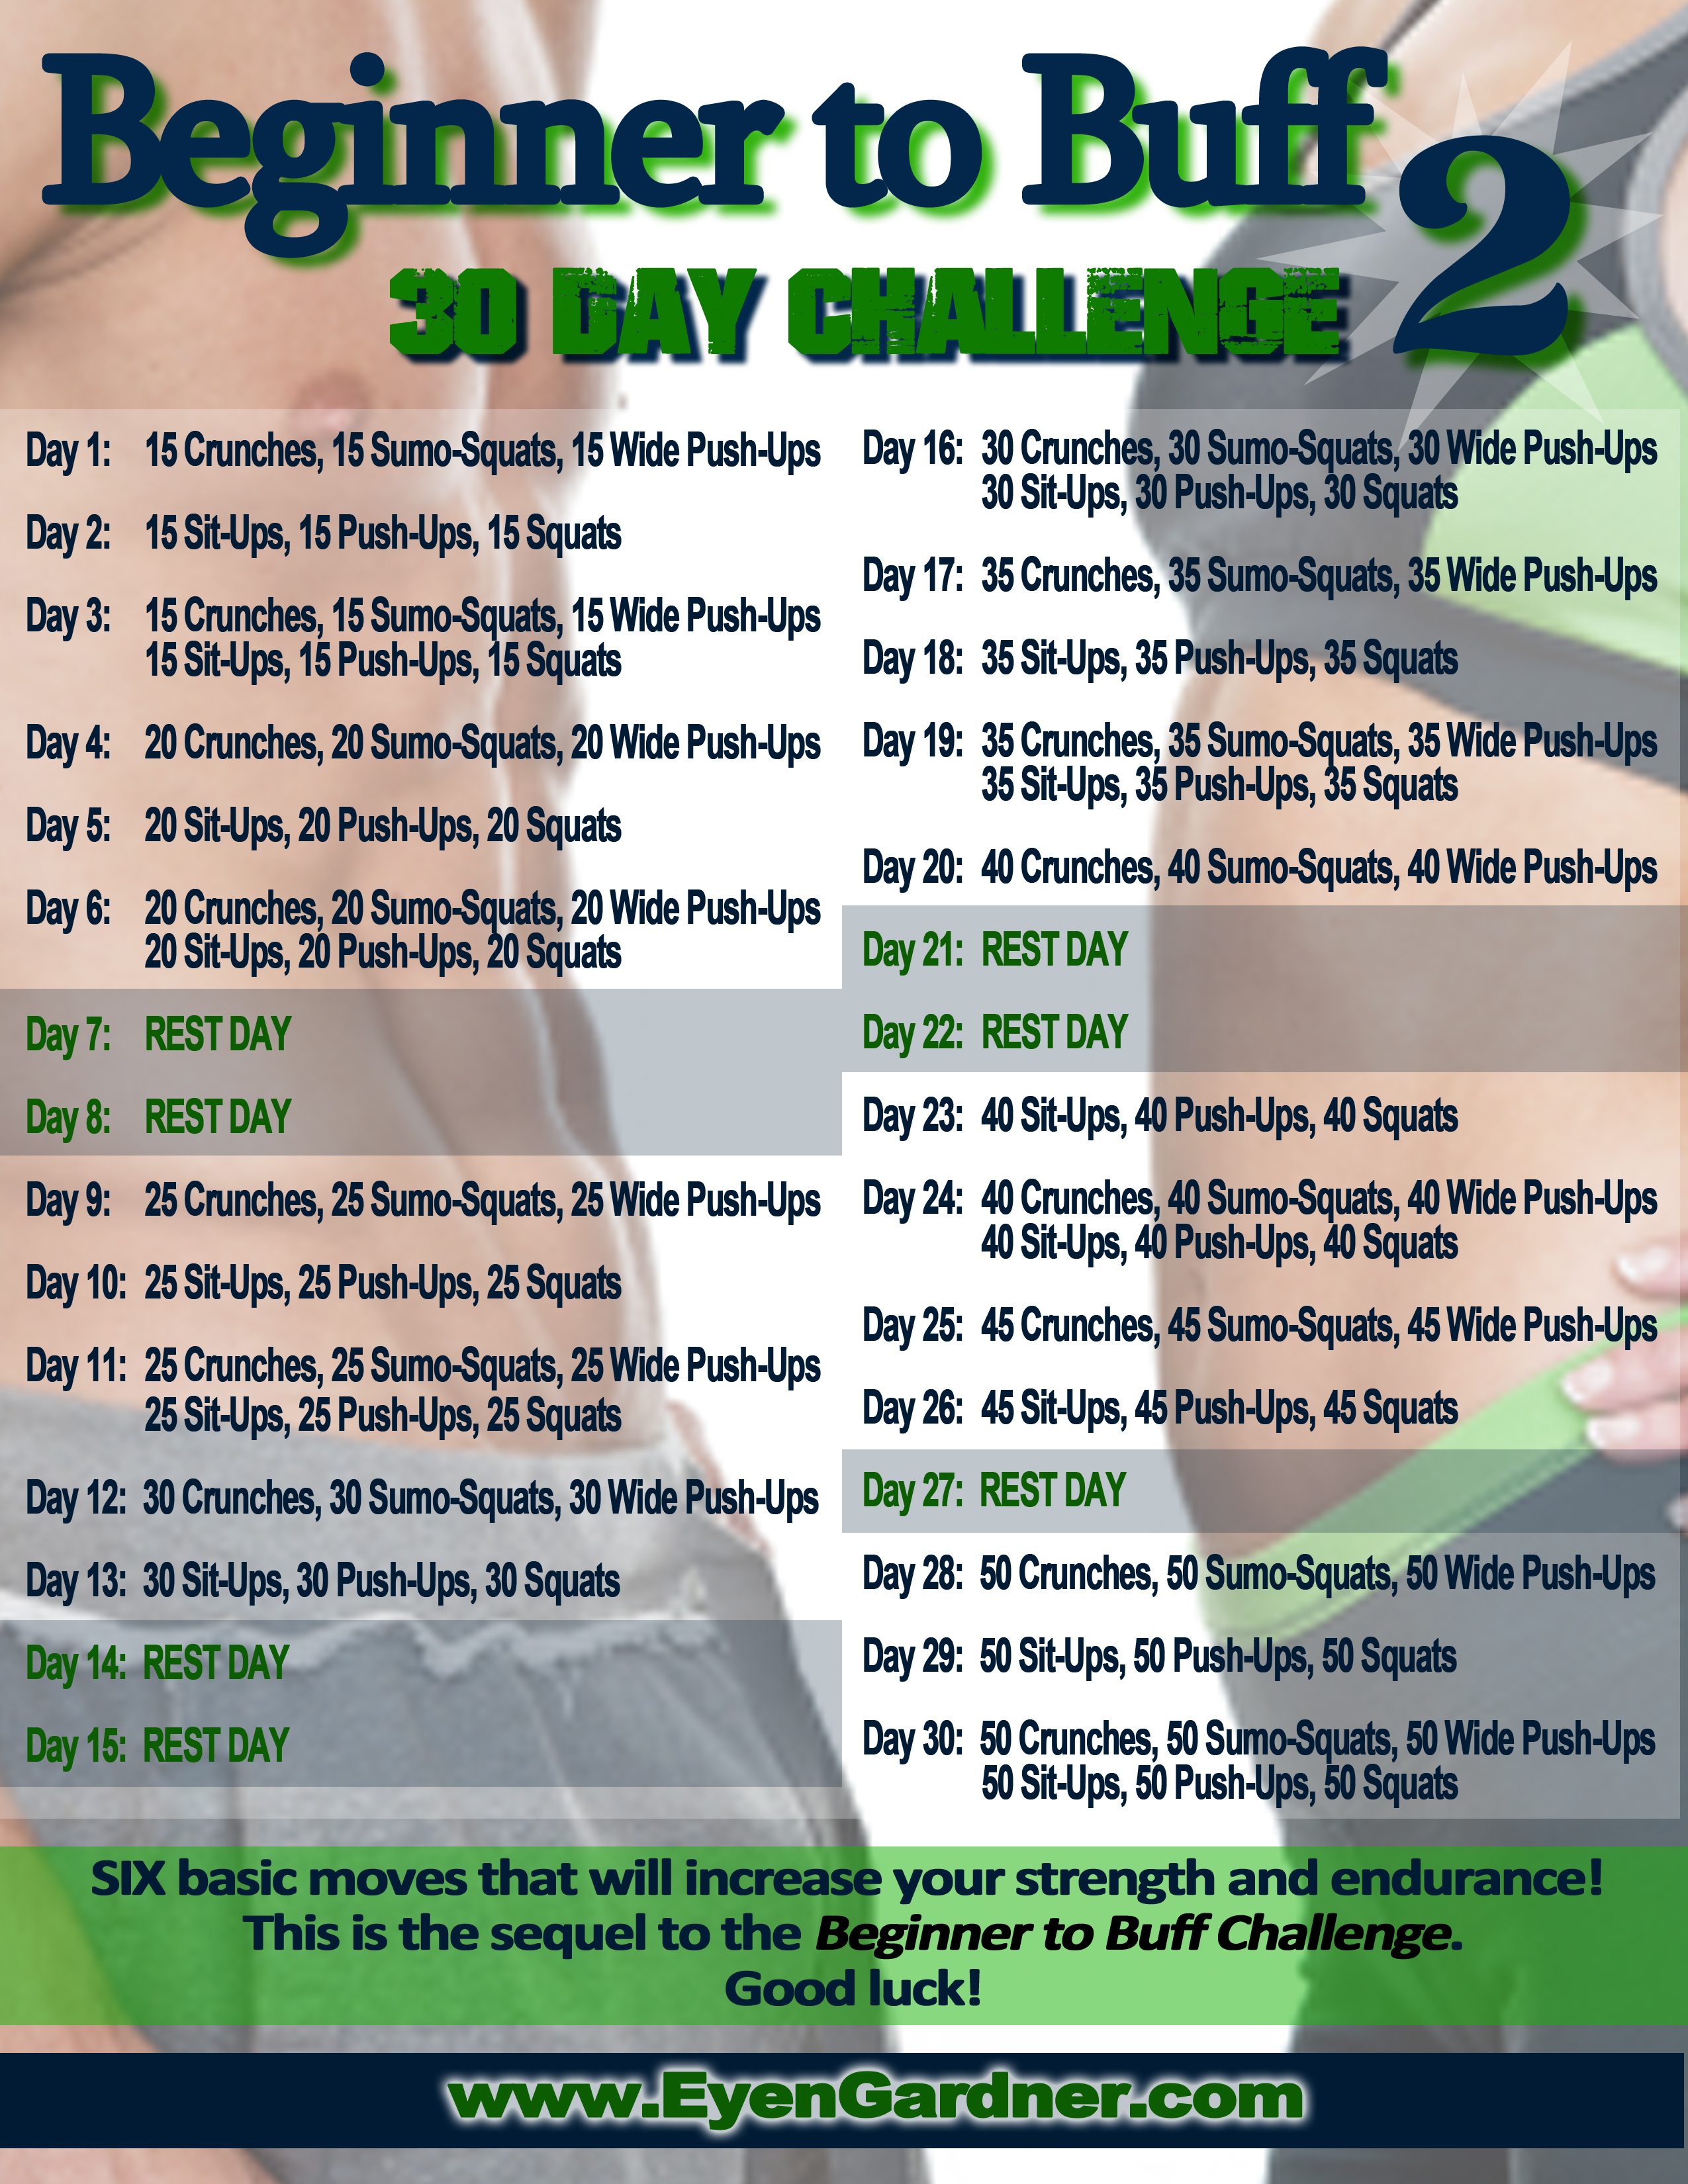 30 day fitness challenge